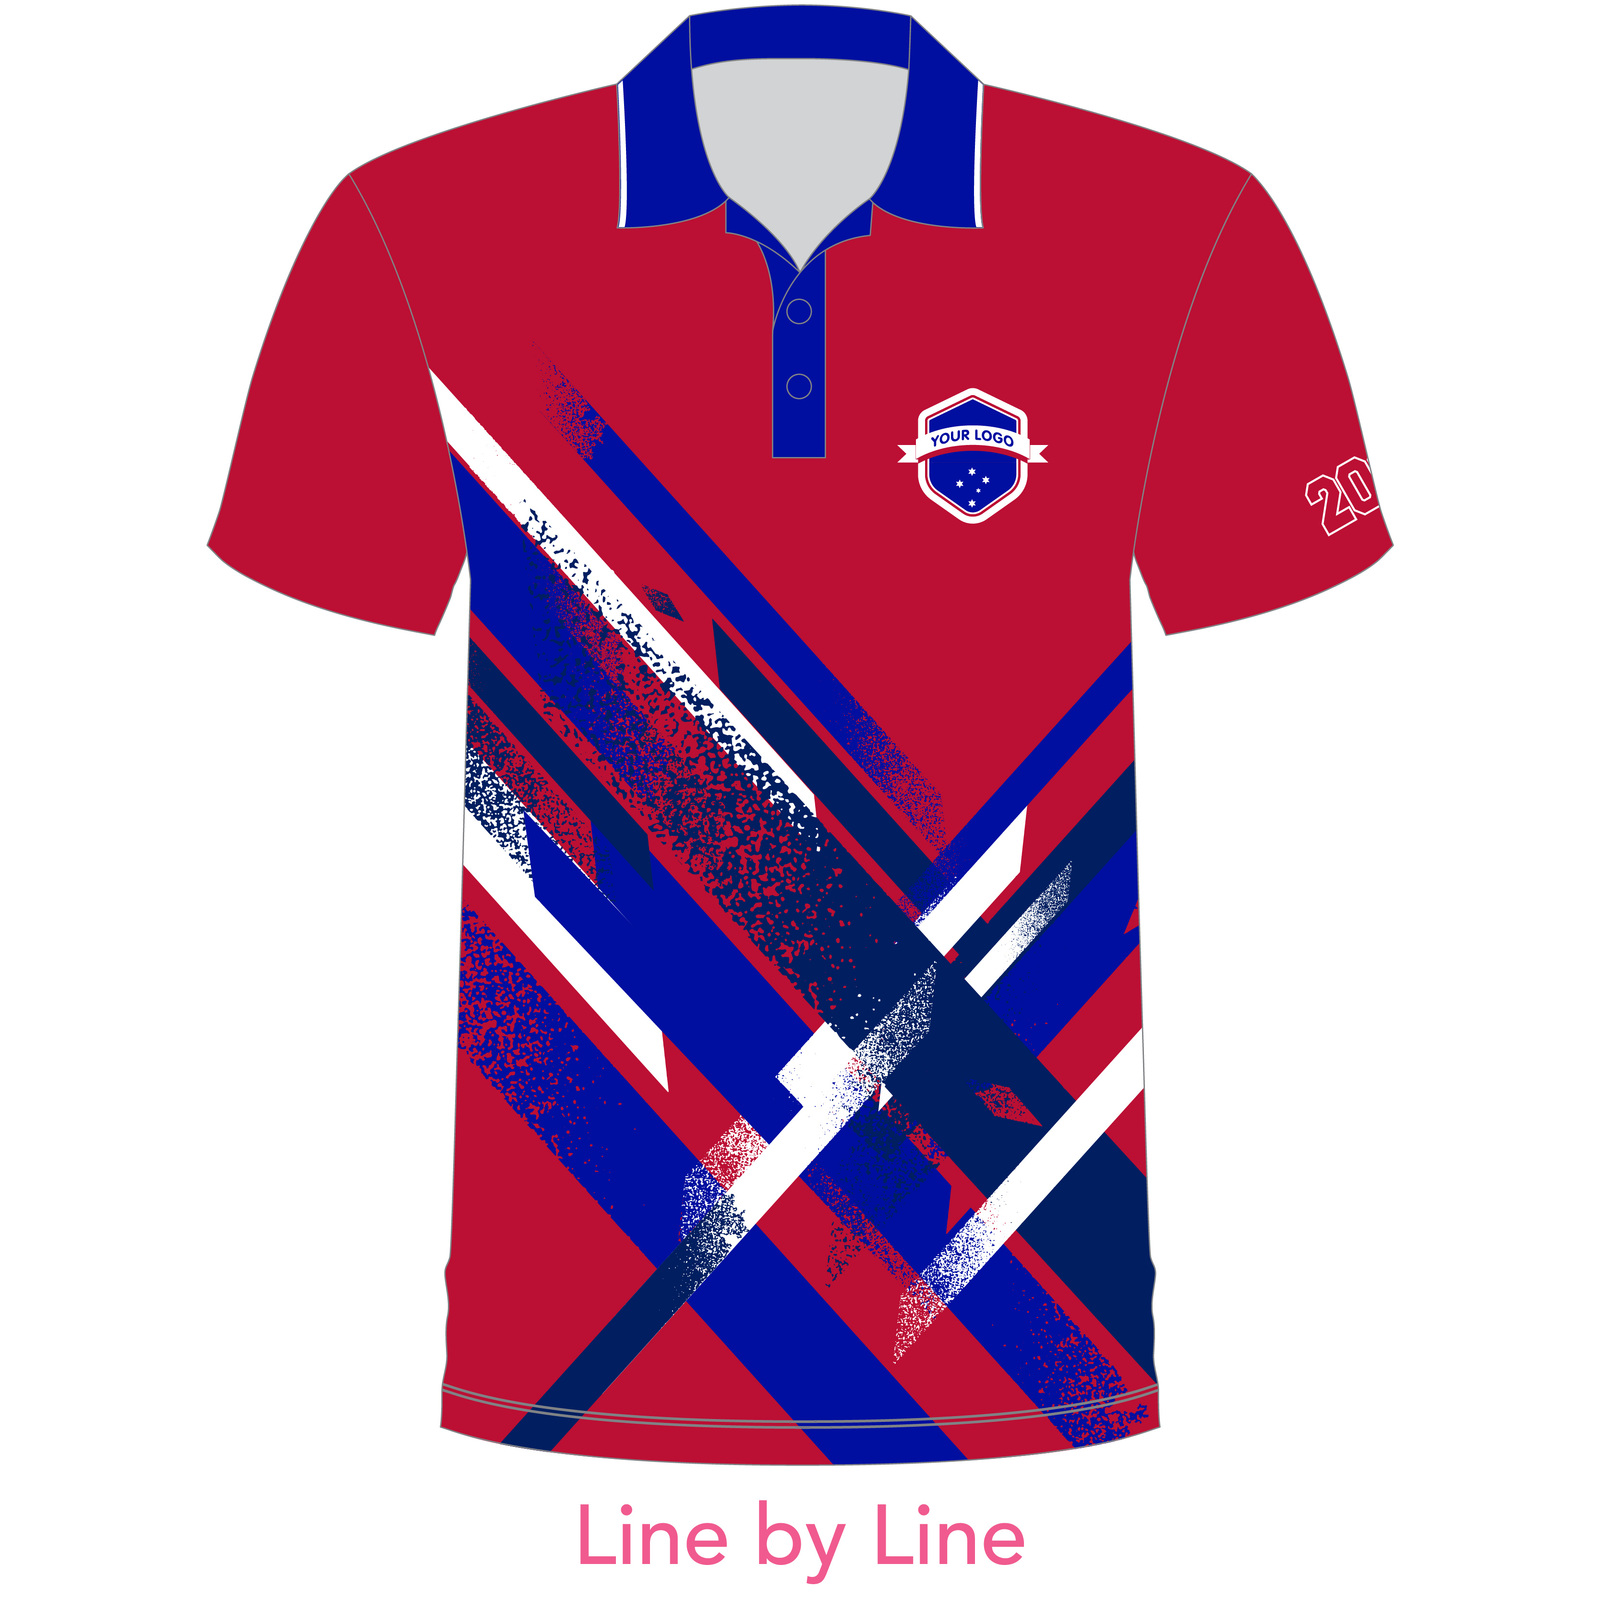 Customised Shirt - Line by Line